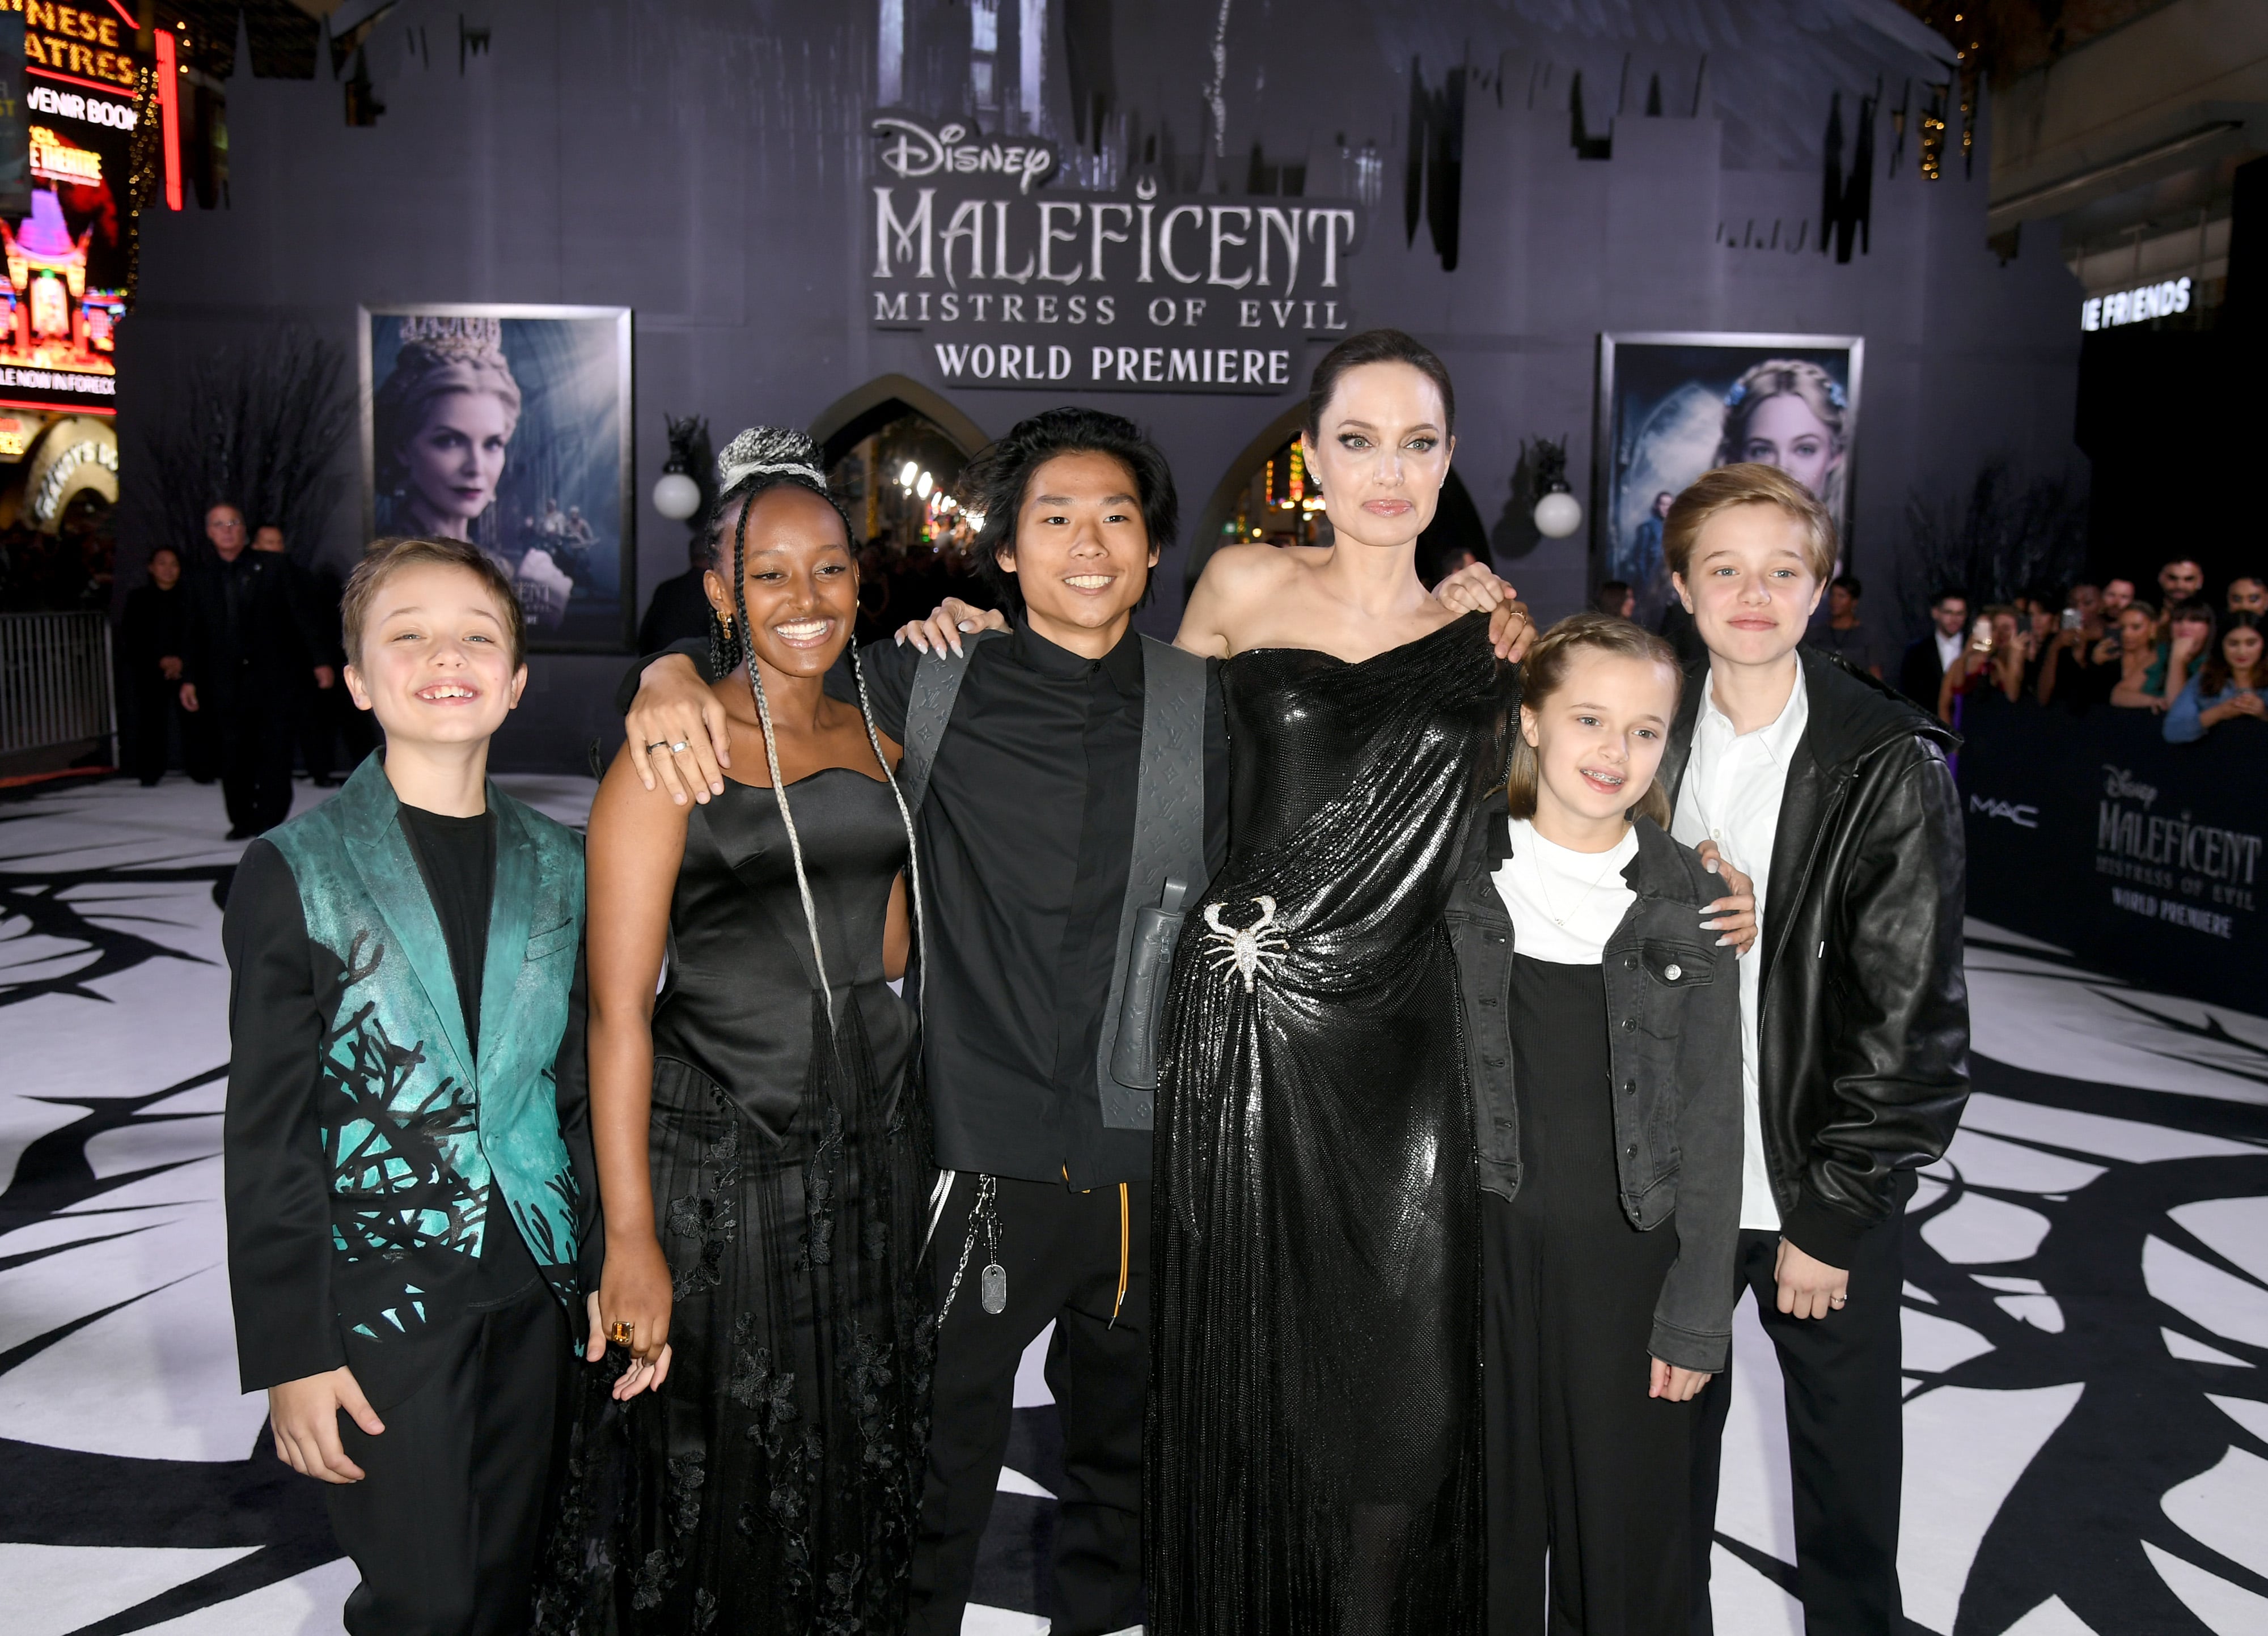 maleficent as a child actress